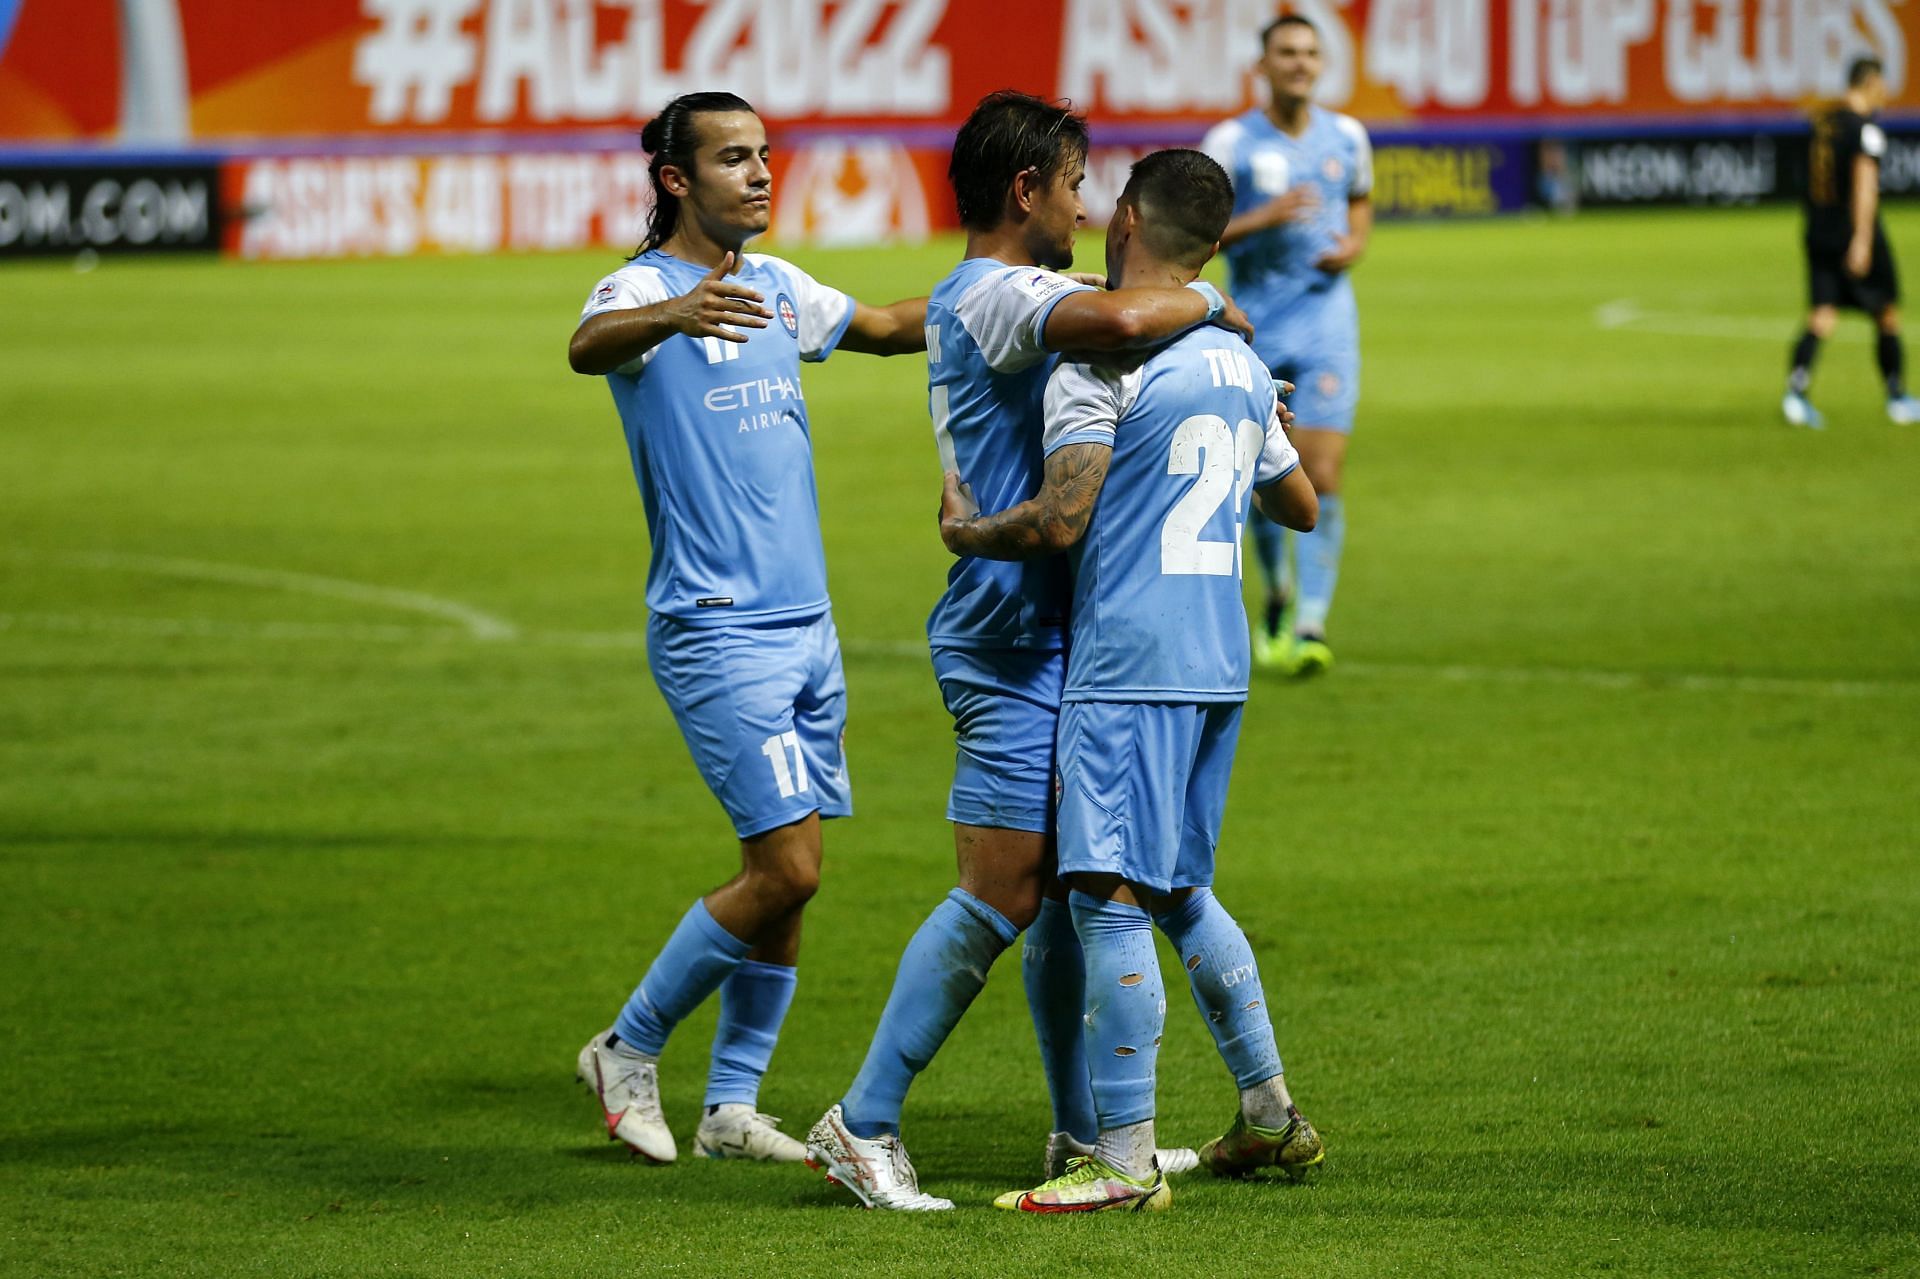 Melbourne City face Jeonnam Dragons in their upcoming AFC Champions League fixture on Thursday